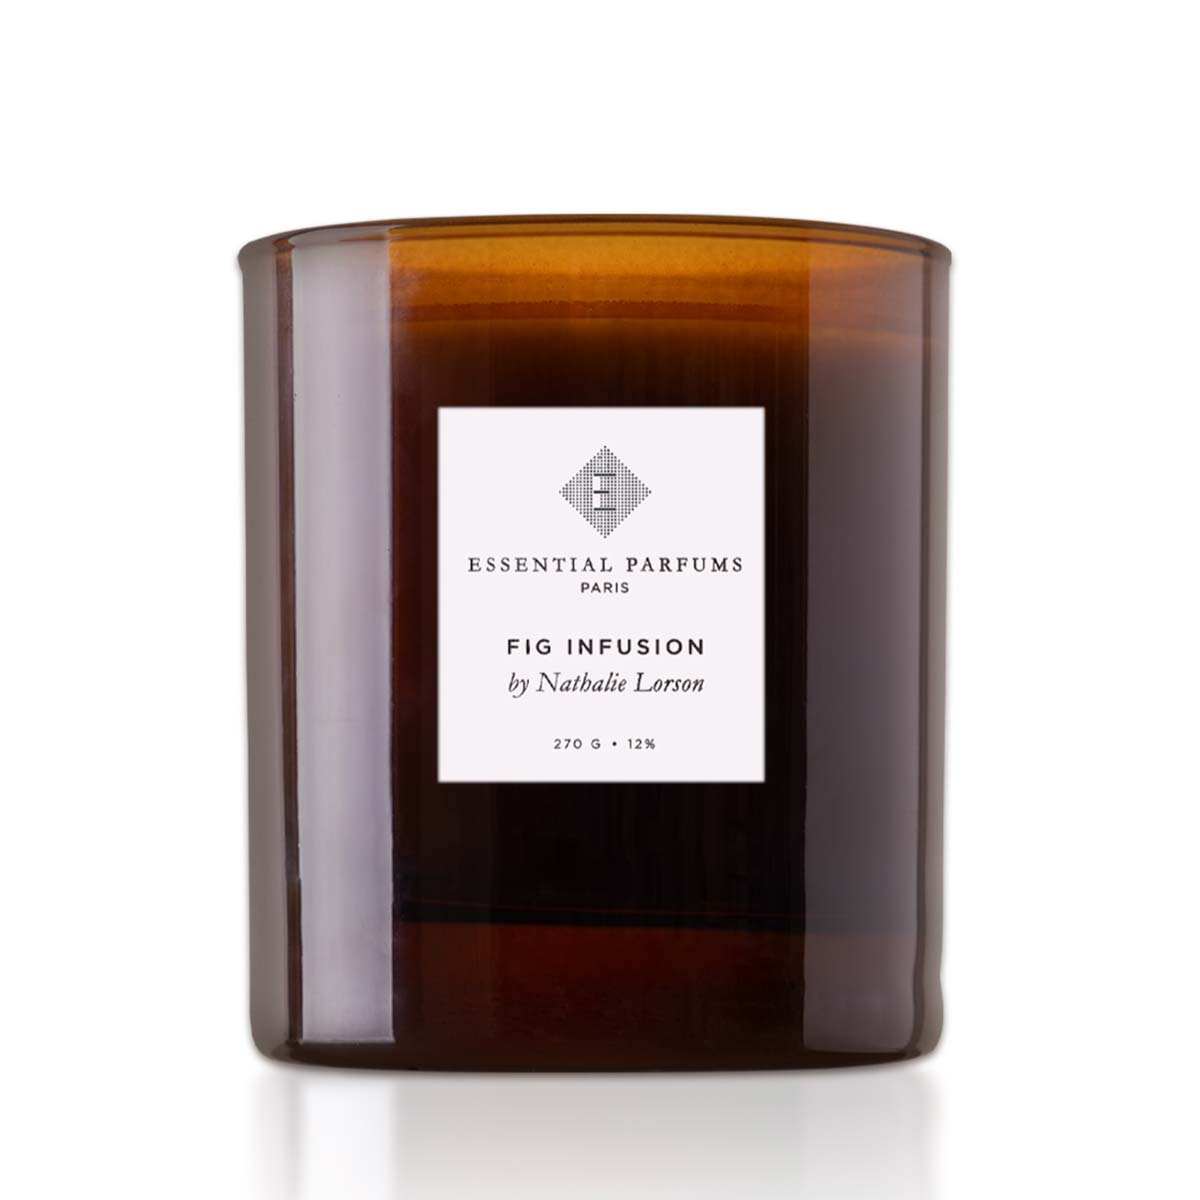 ESSENTIAL PARFUMS - FIG INFUSION CANDLE